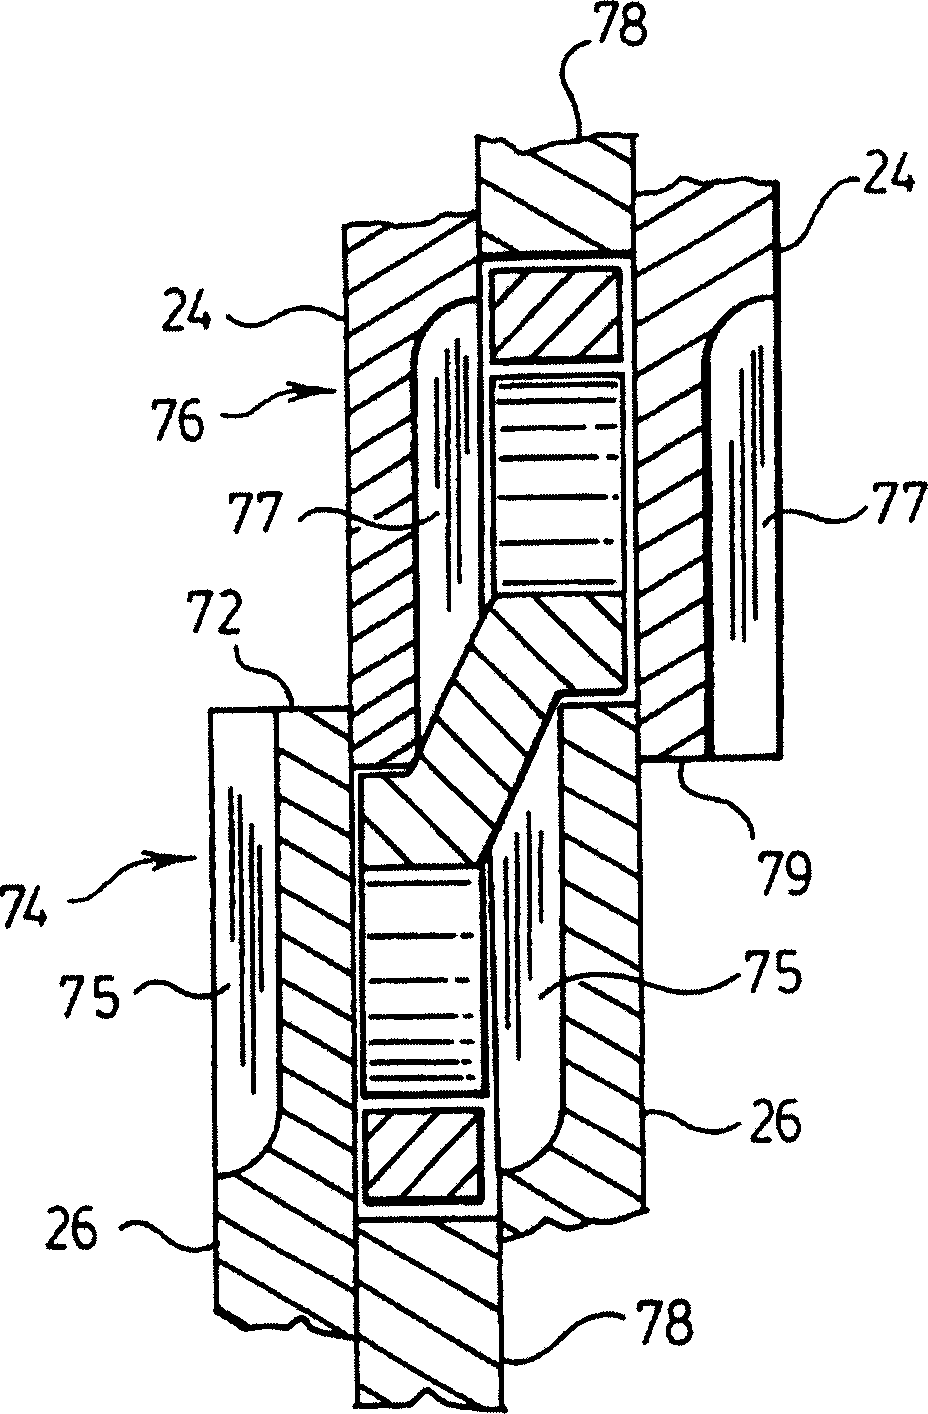 One-step rotary forming of uniform expanded mesh